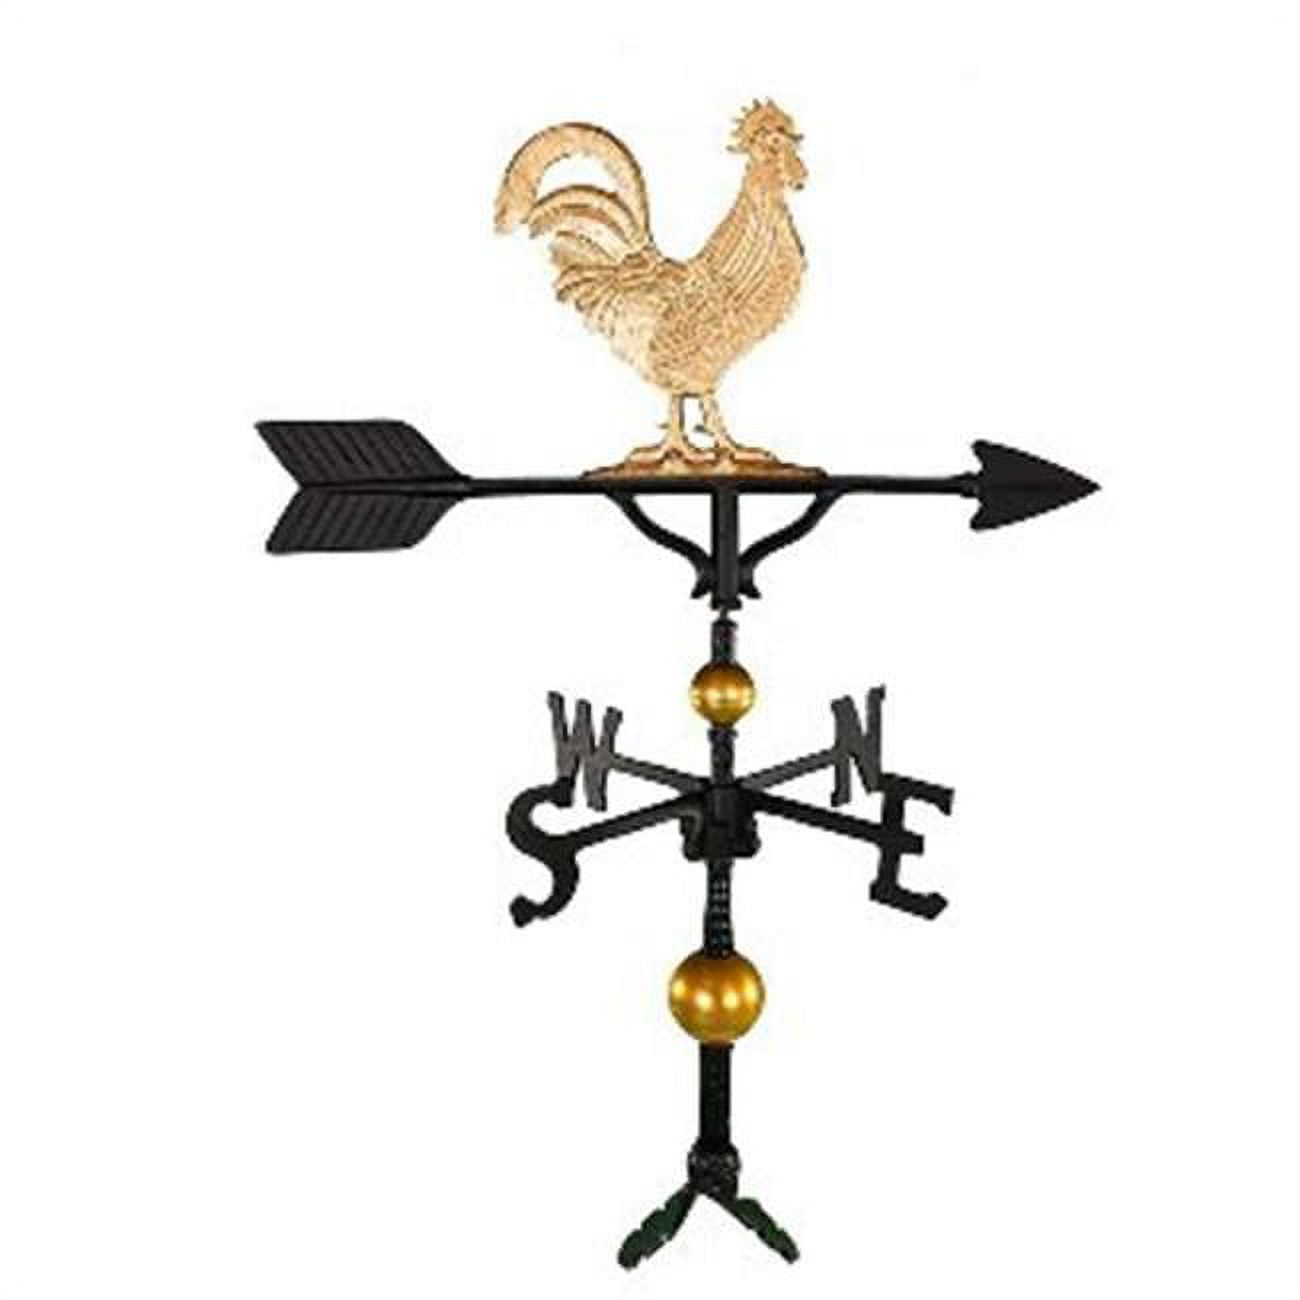 Montague Metal Products WV-376-GB 300 Series 32 In. Deluxe Gold Rooster Weathervane - image 1 of 1